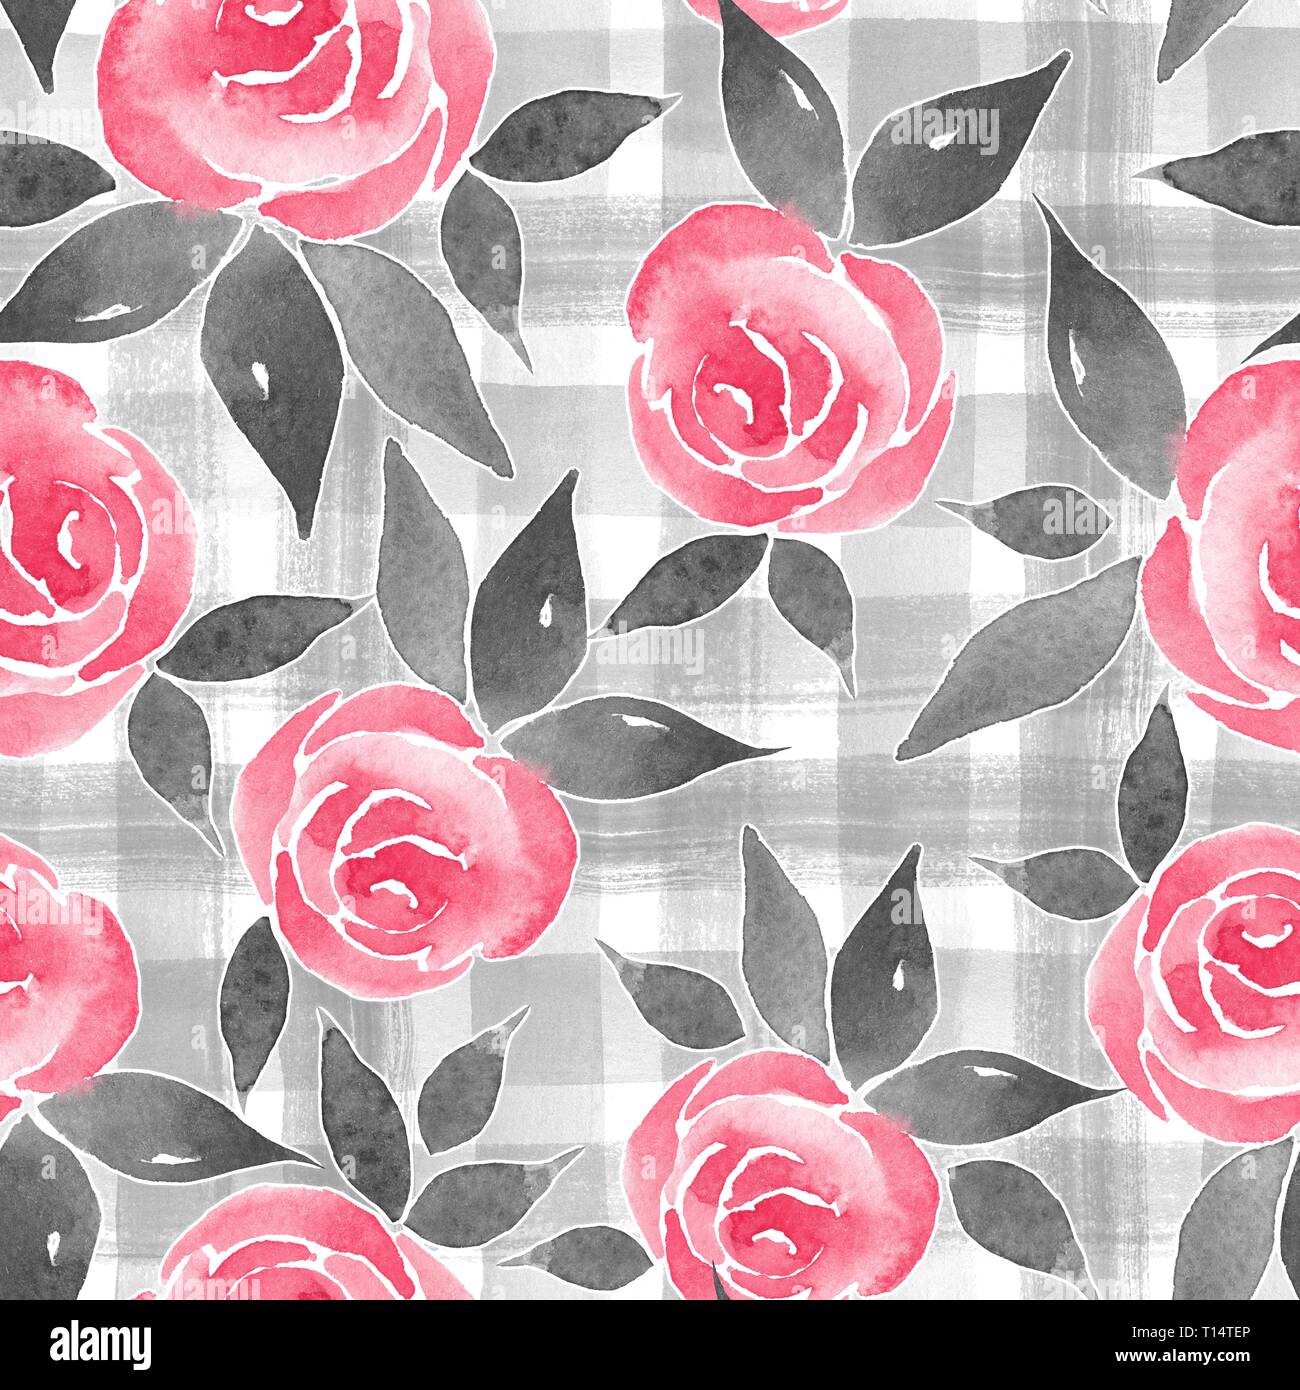 Watercolor seamless pattern with flowers Stock Photo